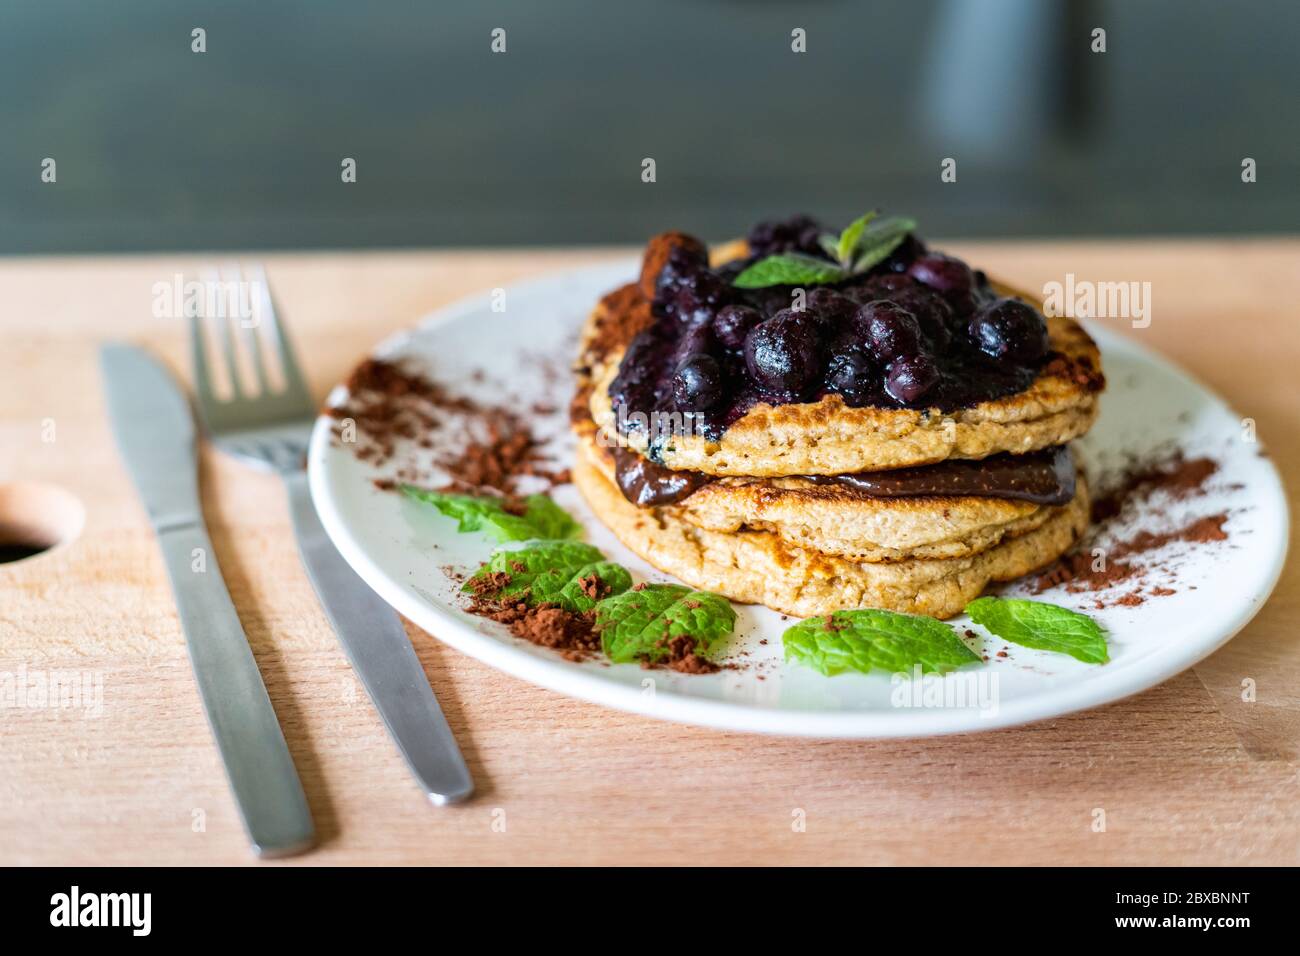 Delicious oats American pancakes with homemade chocolate toping, cooked blueberries and fresh mint leafs. Healthy lifestyle cooking Stock Photo